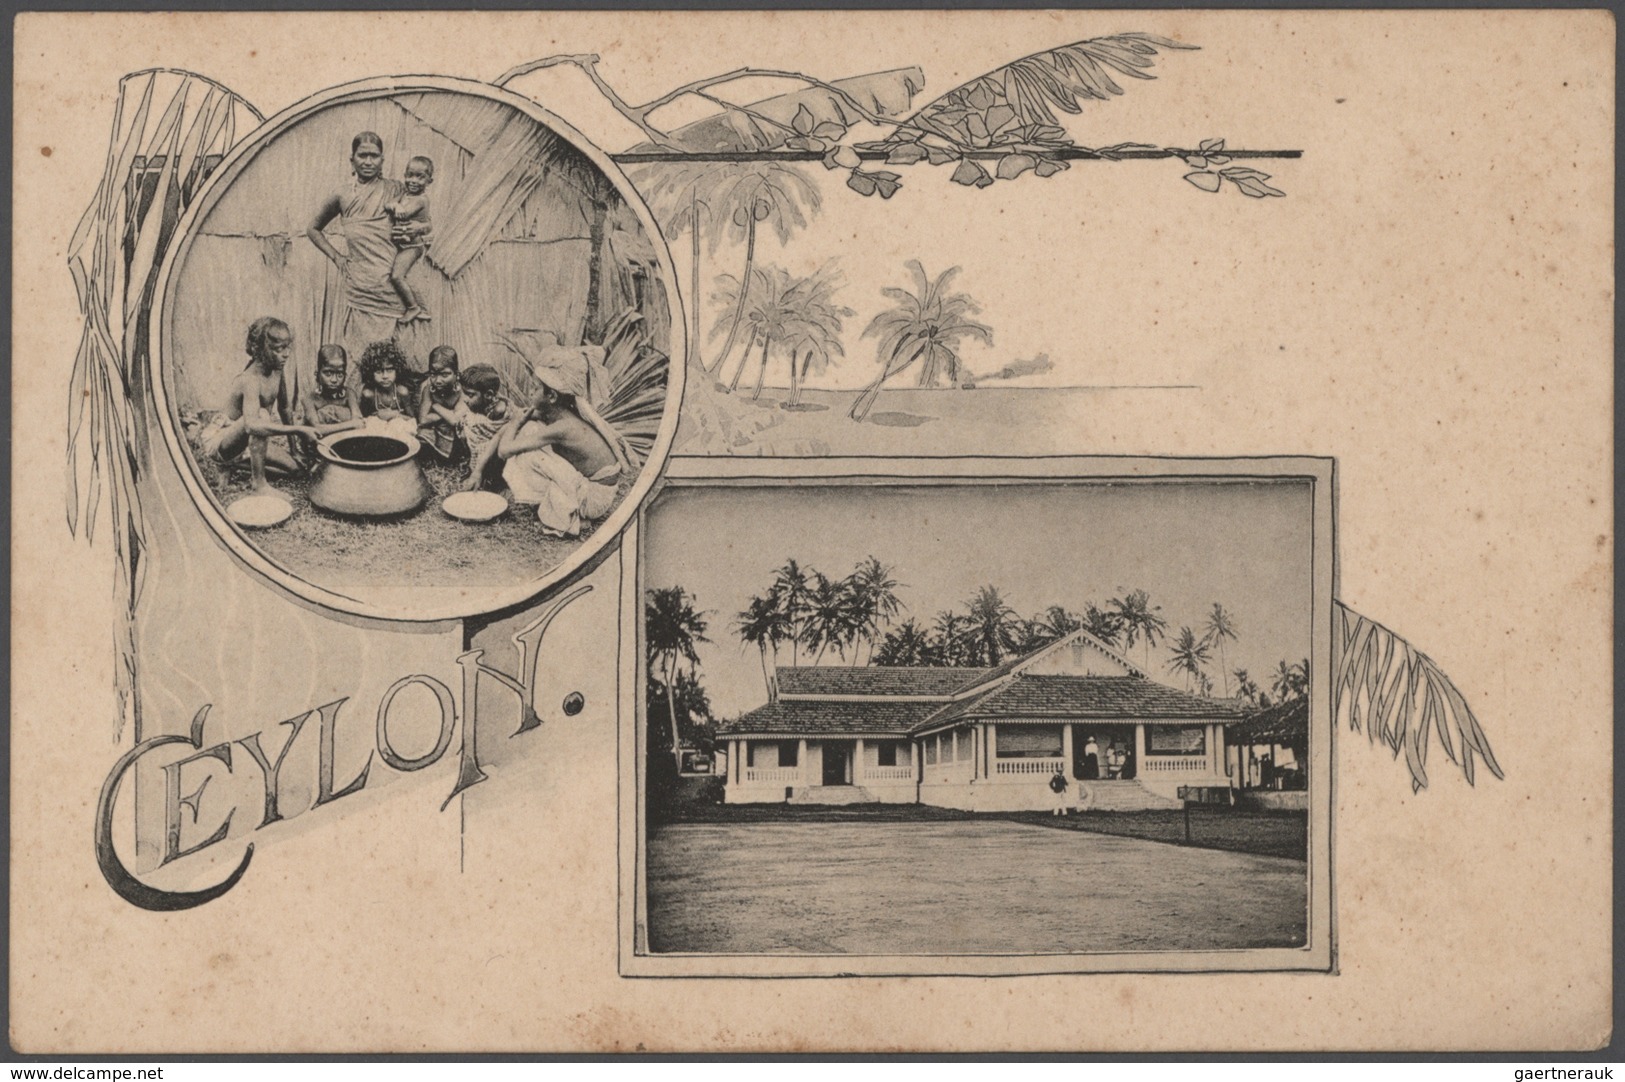 Ceylon / Sri Lanka: 1890's-1930's PICTURE POSTCARDS: Collection of about 370 picture postcards, used